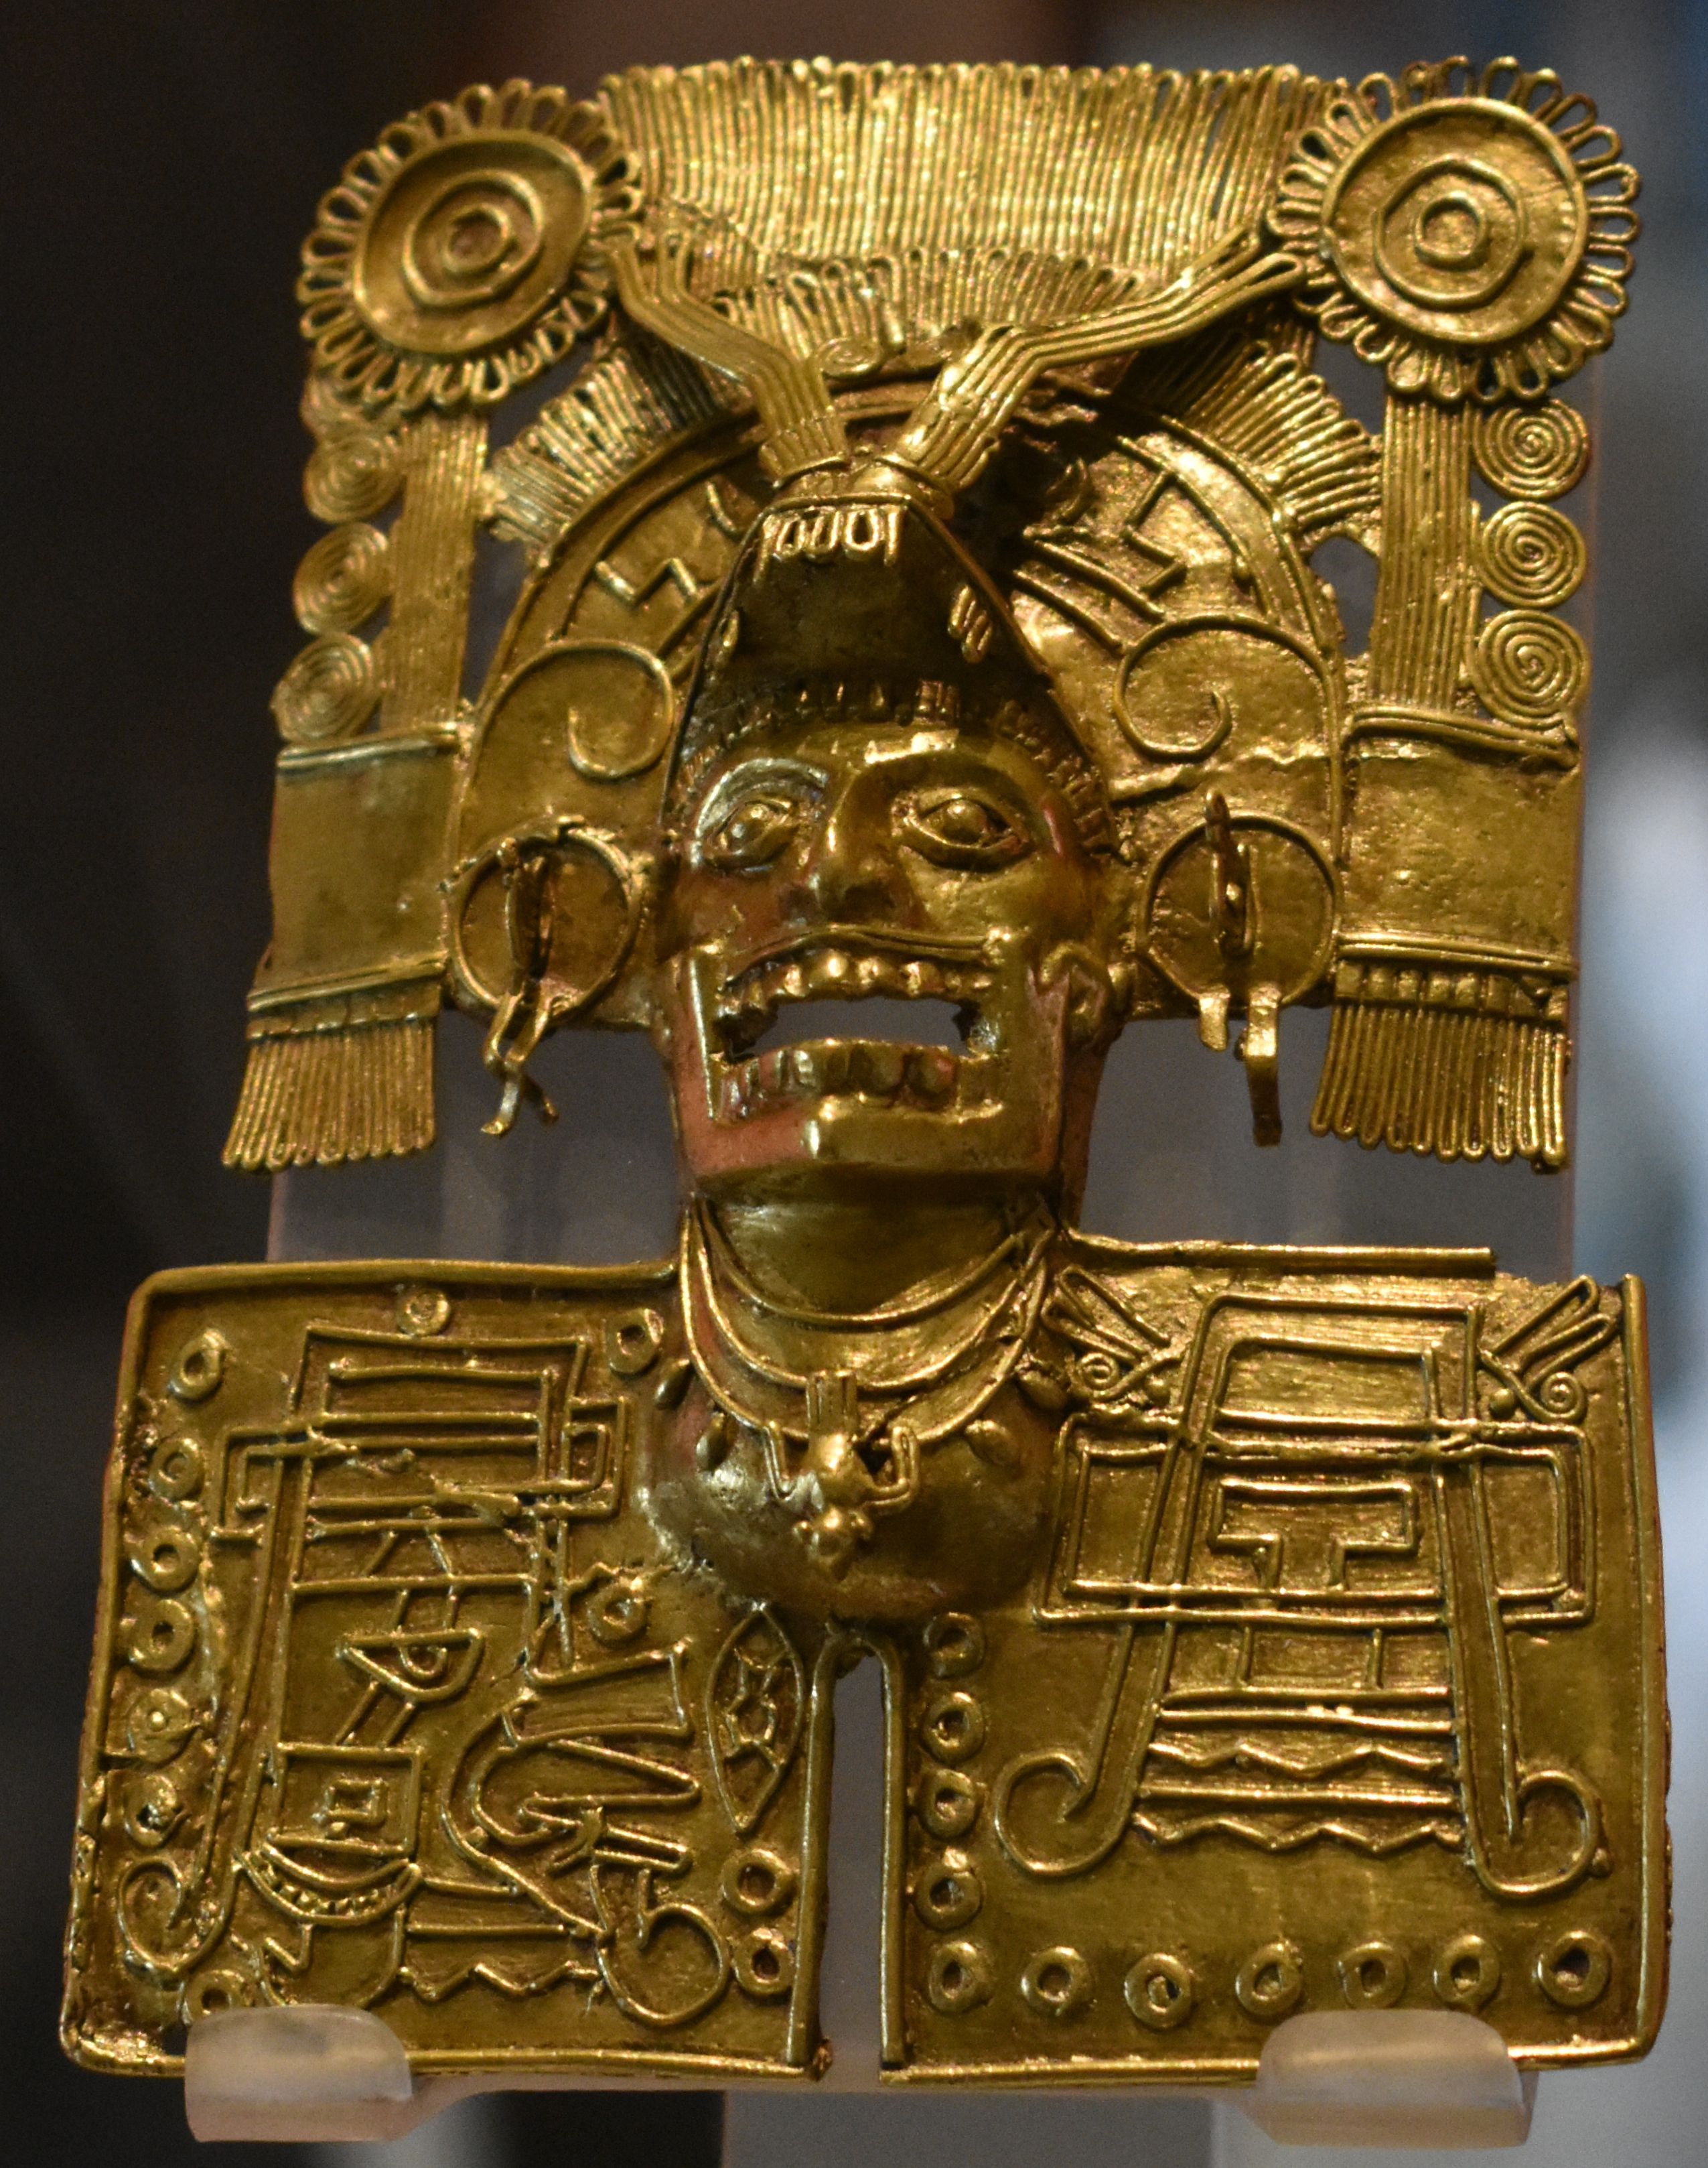 A gold Mixtec pectoral pendant, depicting a man in a headdress and jewelry